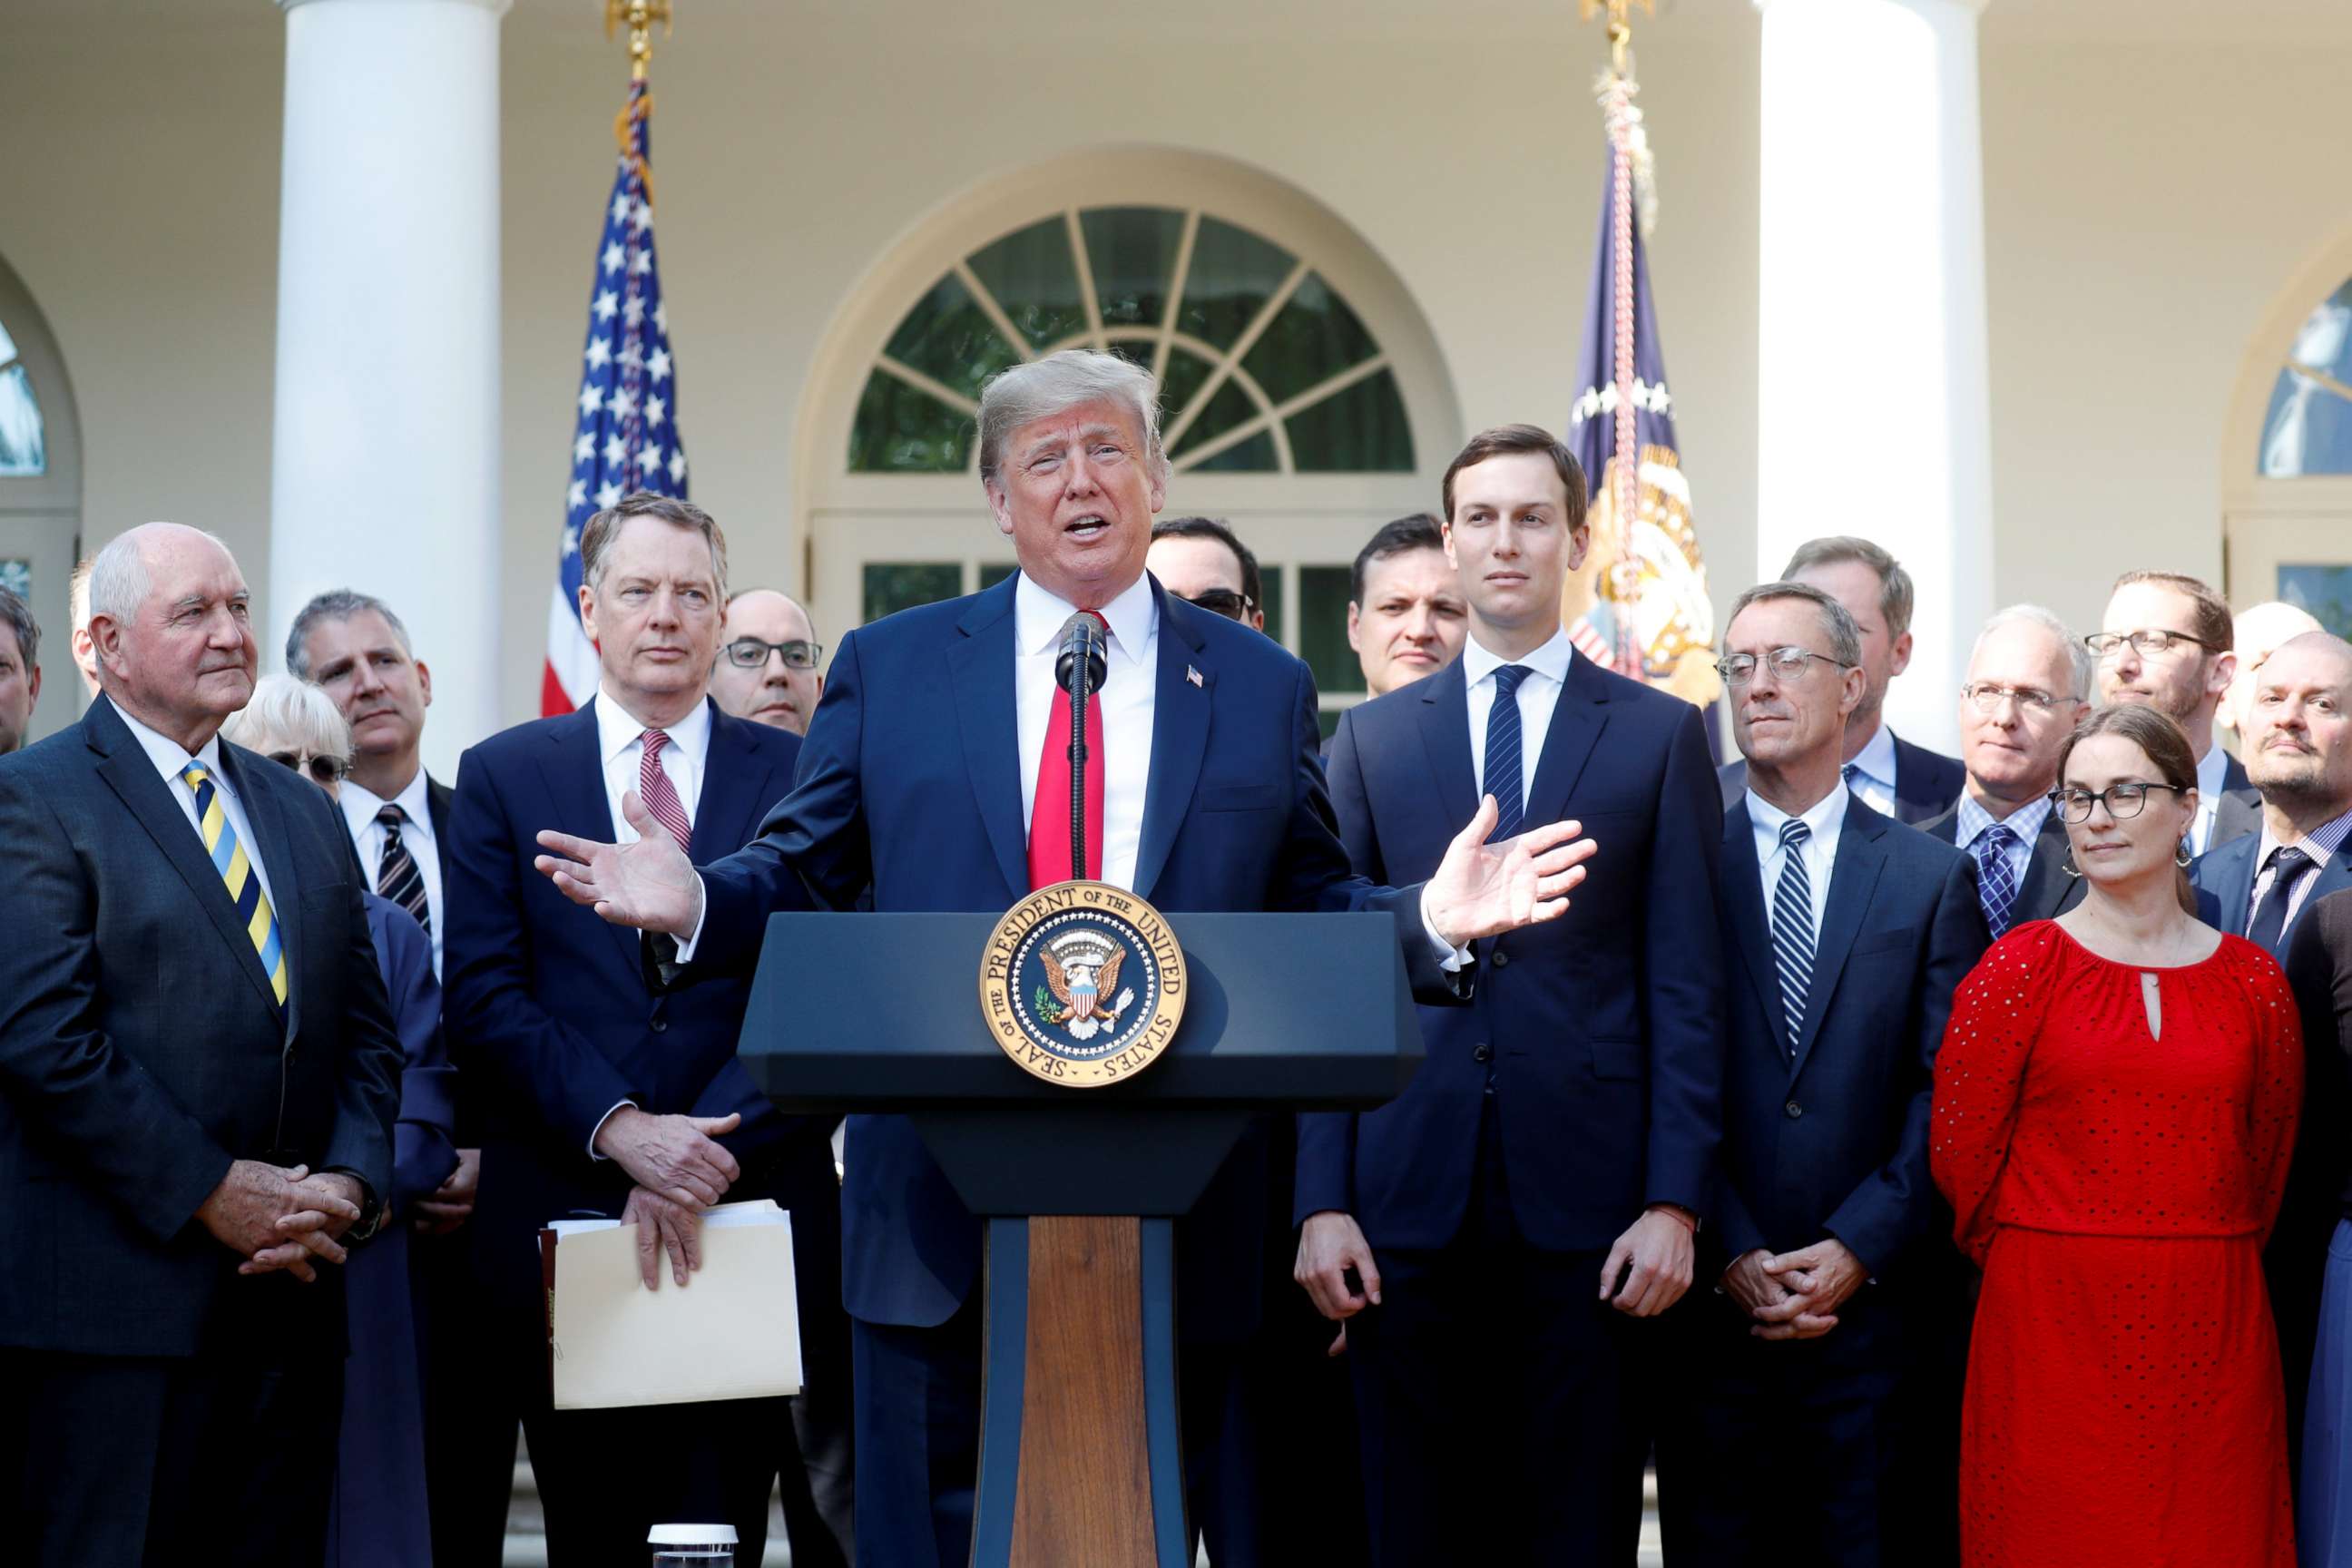 PHOTO: President Donald Trump delivers remarks on the United States-Mexico-Canada Agreement (USMCA) during a news conference in the Rose Garden of the White House in Washington, Oct. 1, 2018.